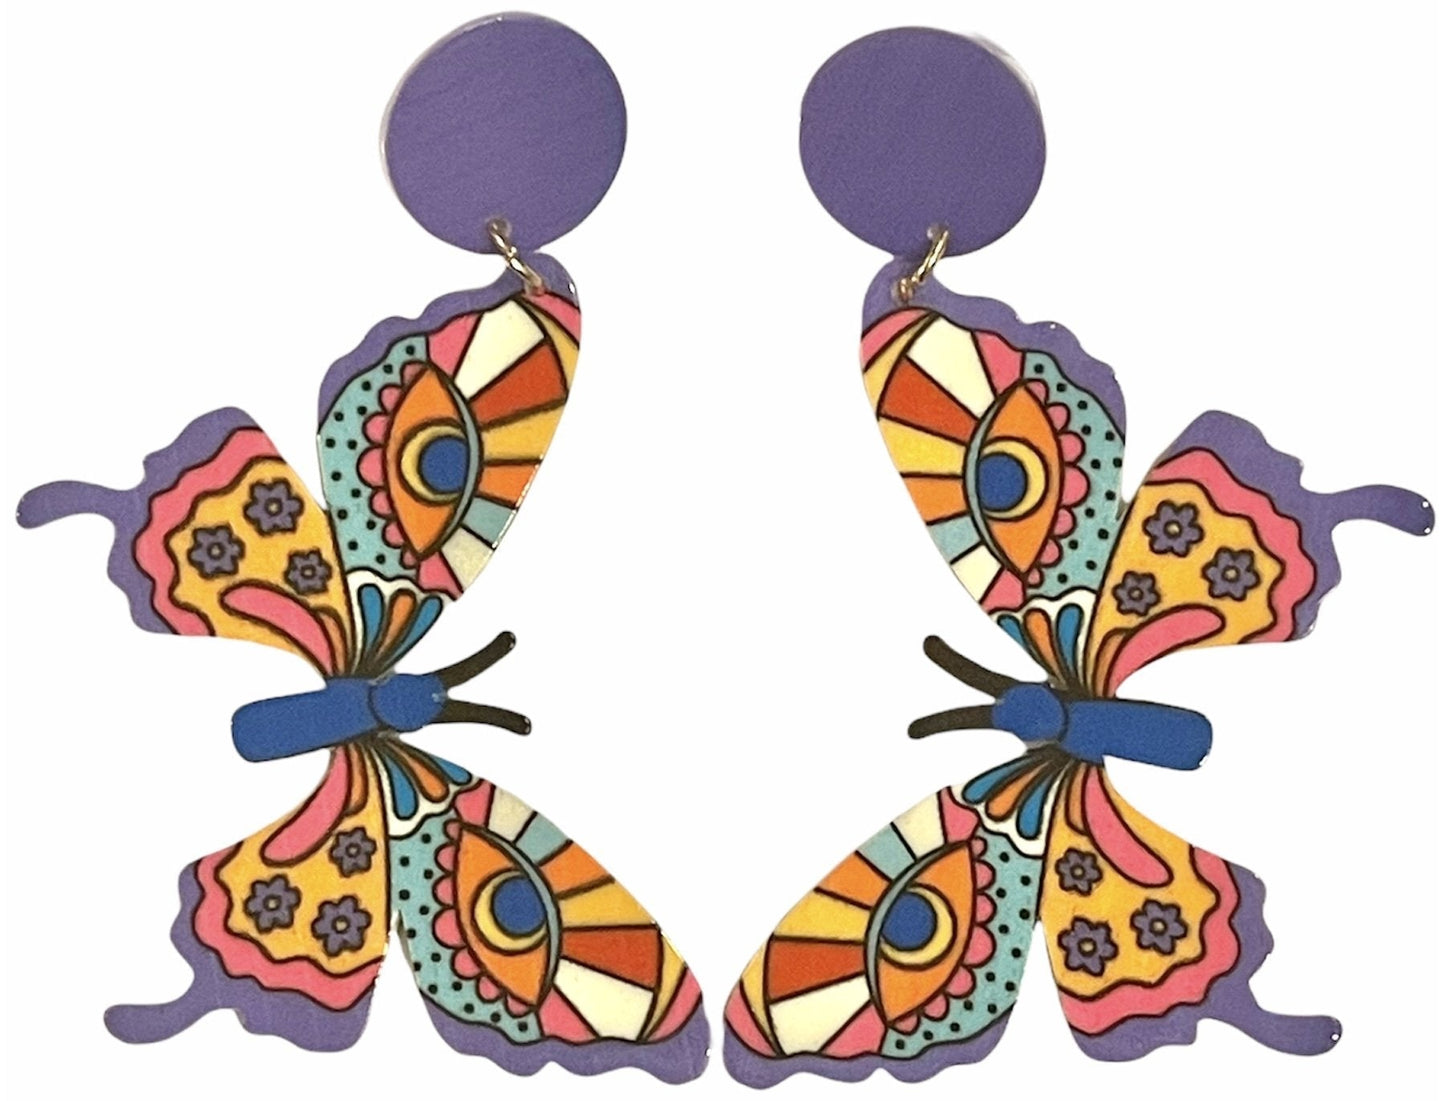 The Phoebe Earring Bundle Sushi Dates Rainbow Guitars and Butterflies - Relic828